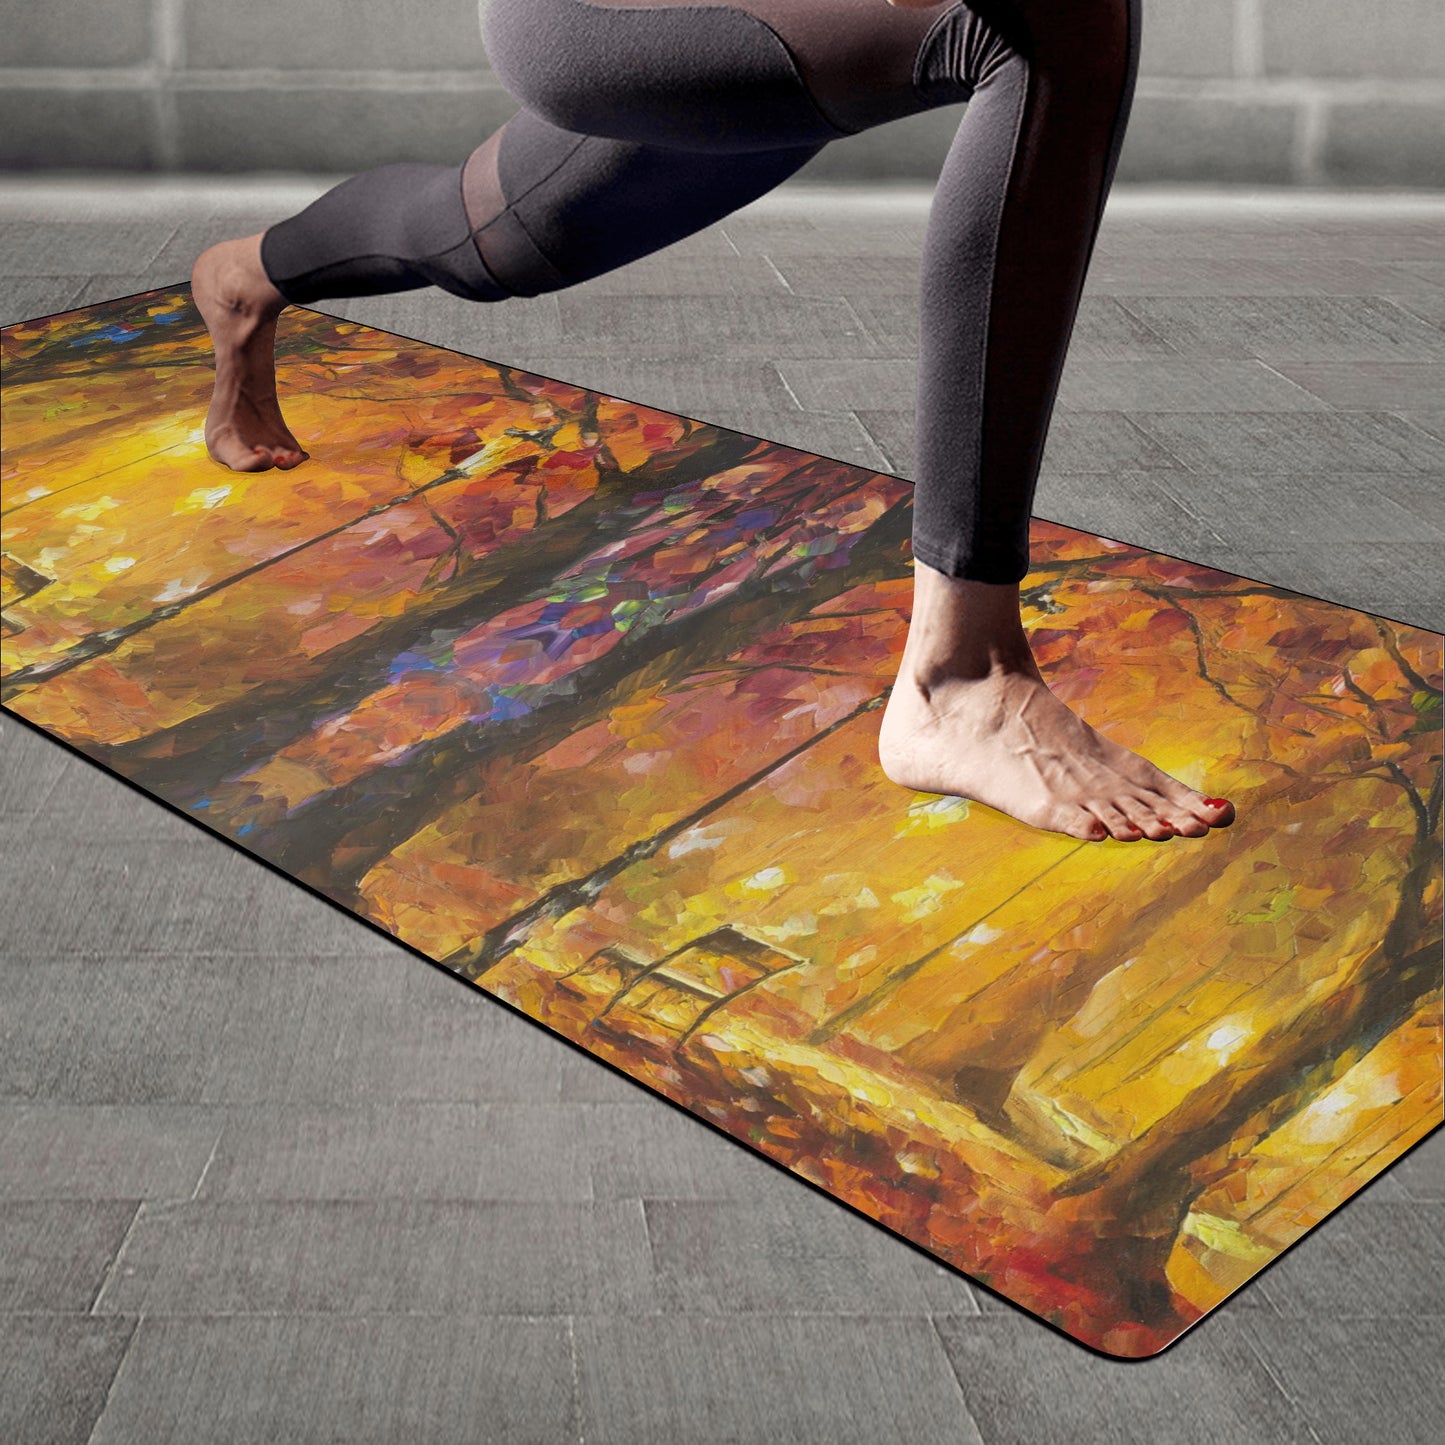 Rubber Yoga Mat Afremov TWINKLE OF PASSION